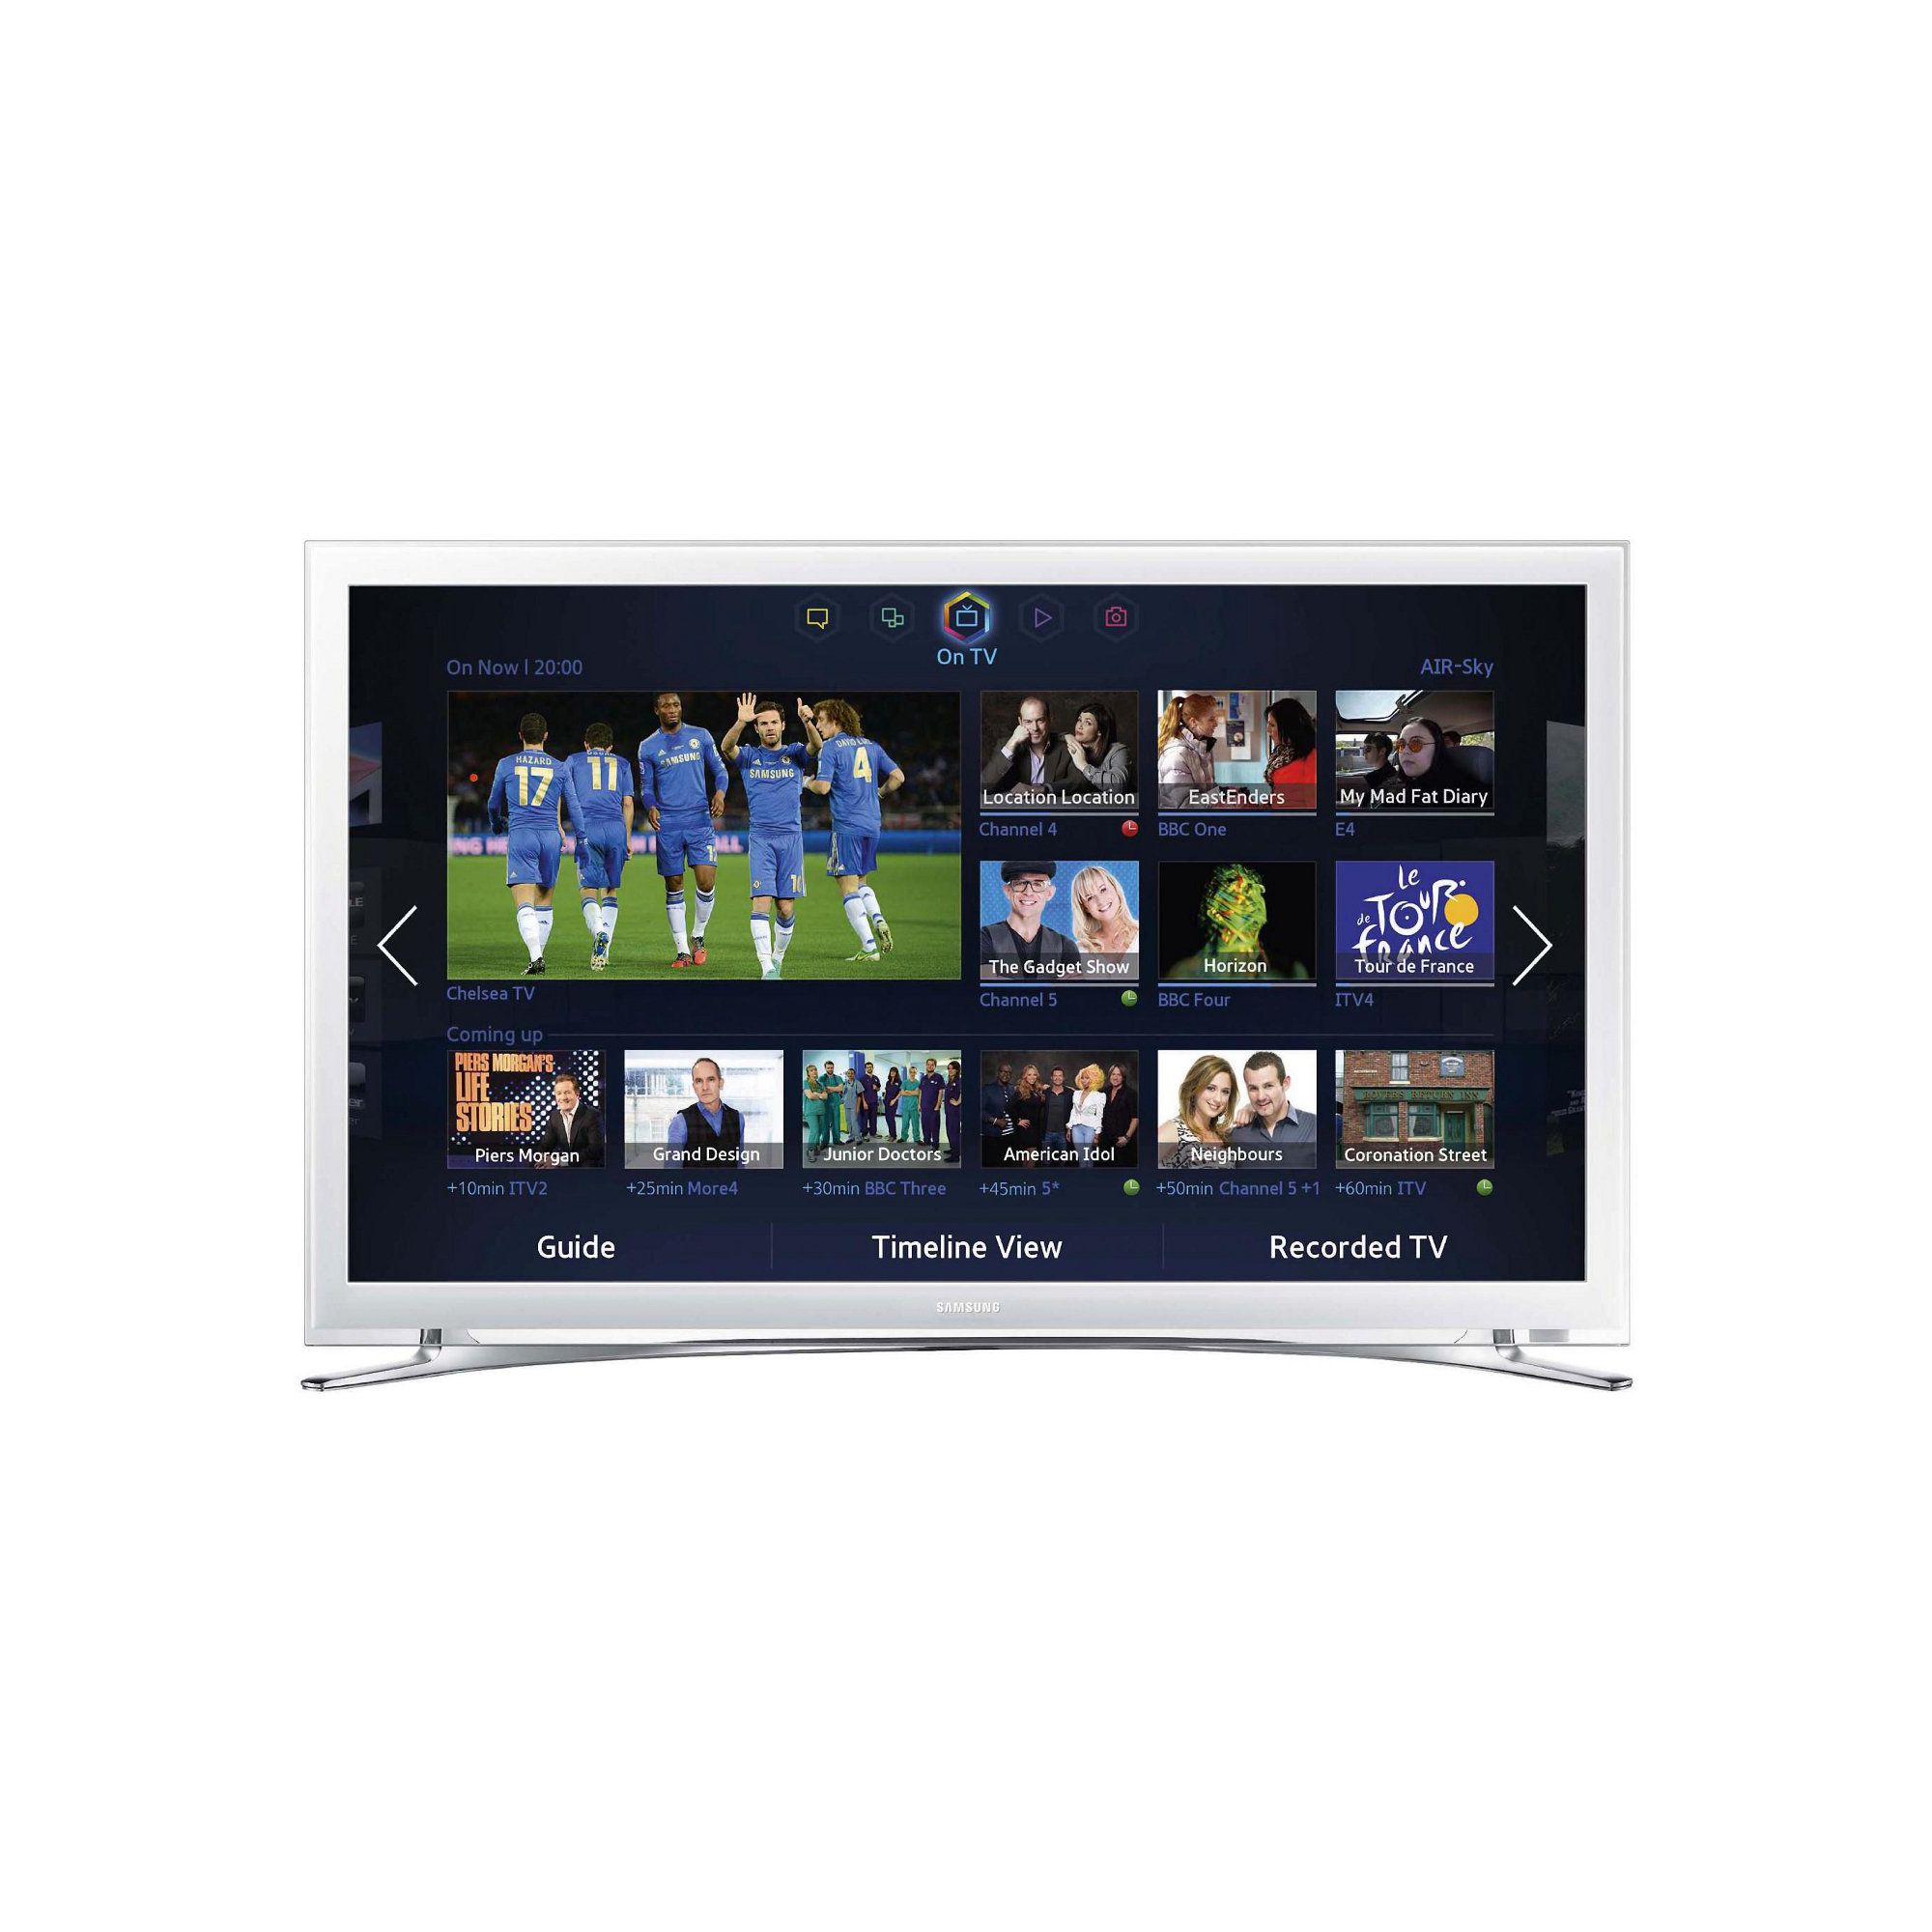 Samsung 22” UE22F5410 Full HD 1080p LED SMART TV with Freeview